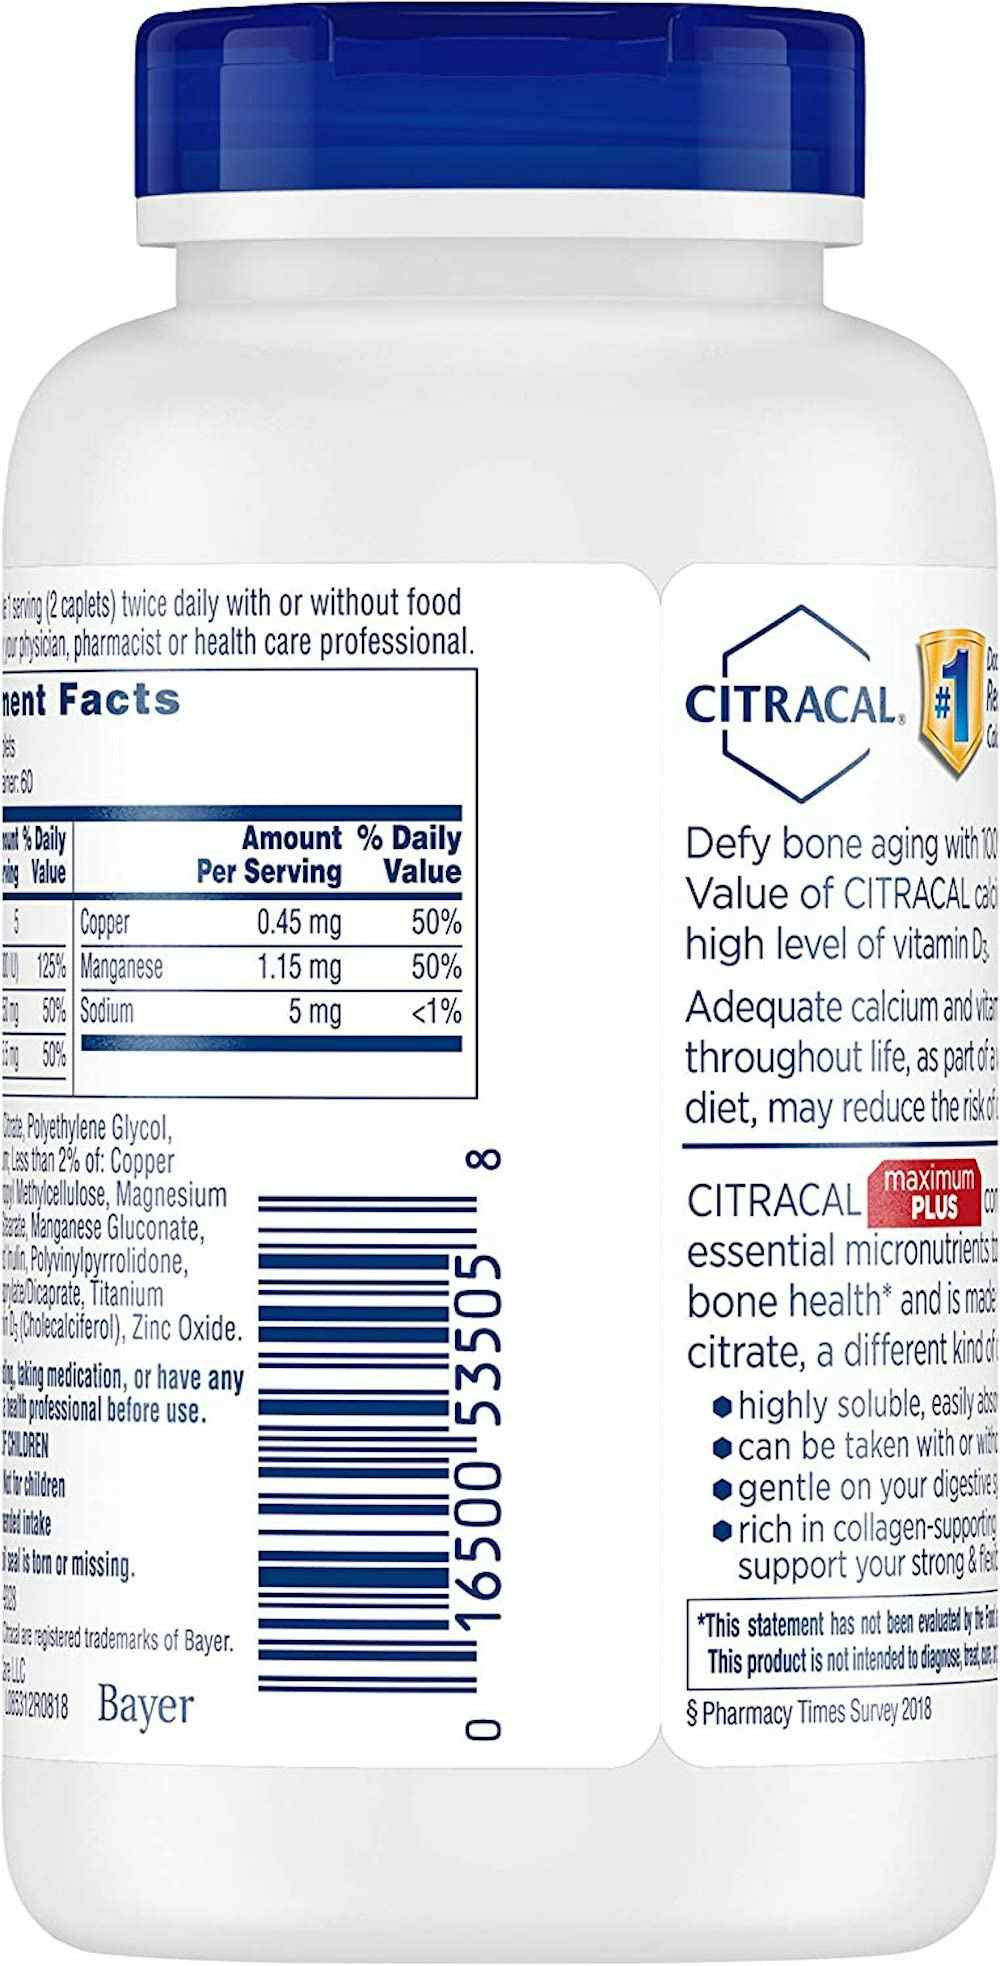 Citracal Maximum Calcium Citrate Formula with D3, 315 mg, 120 Coated Tablets, 01650053505, 1 Bottle